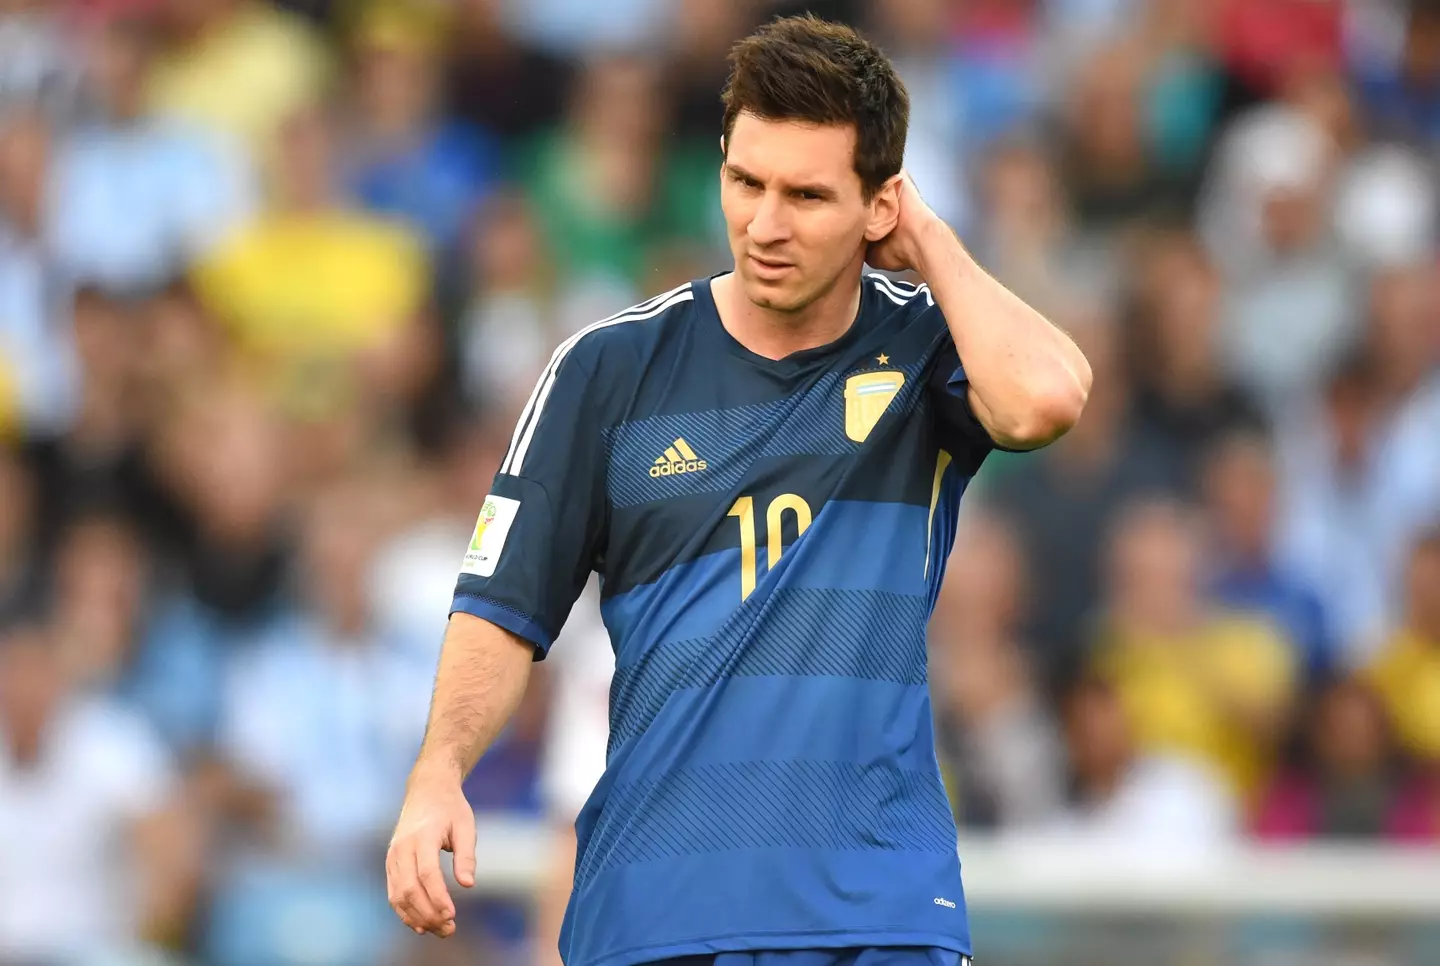 Messi in the 2014 World Cup final. (Image